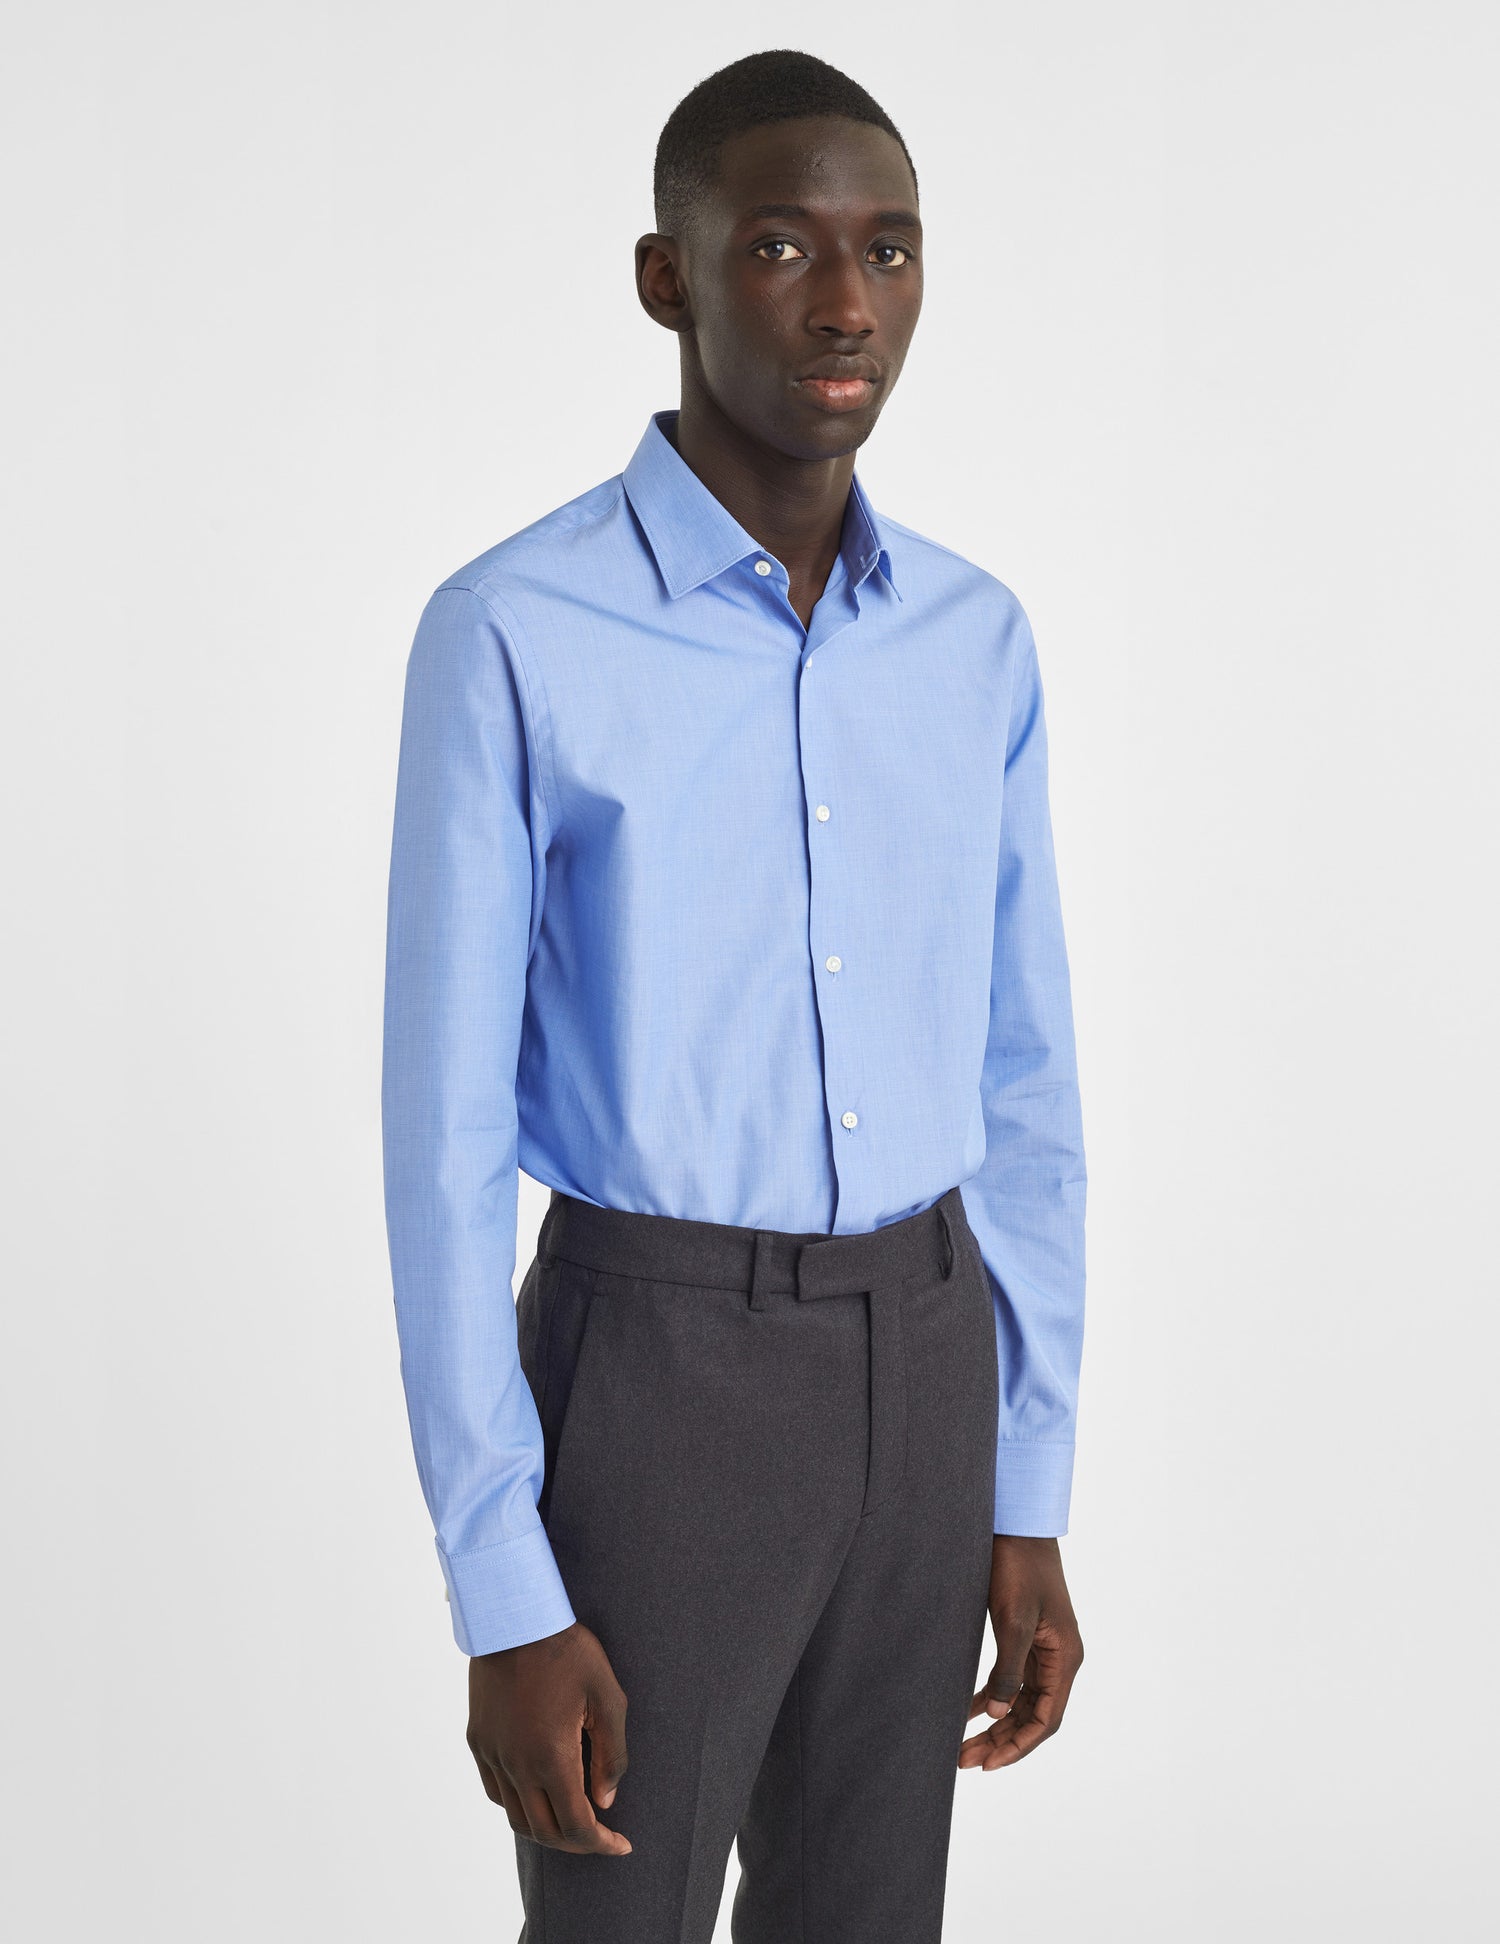 Semi-fitted blue shirt - Wire to wire - Figaret Collar#3